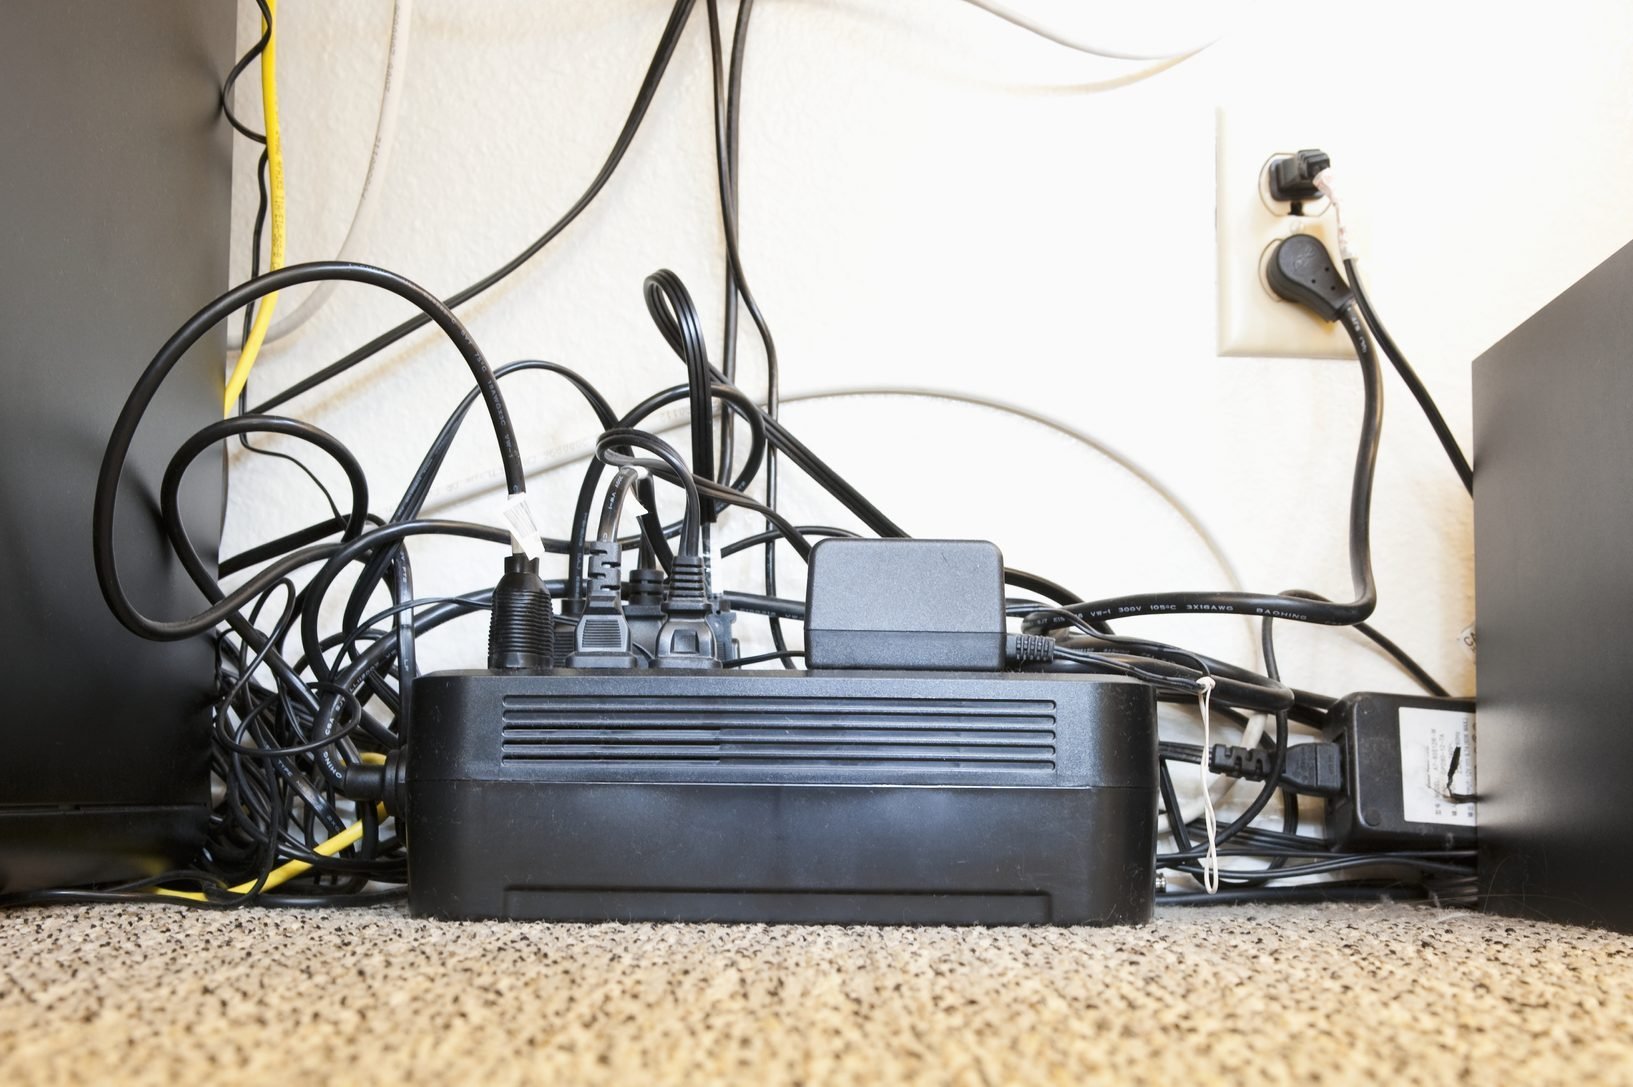 Surge Protector and Many Power Cables